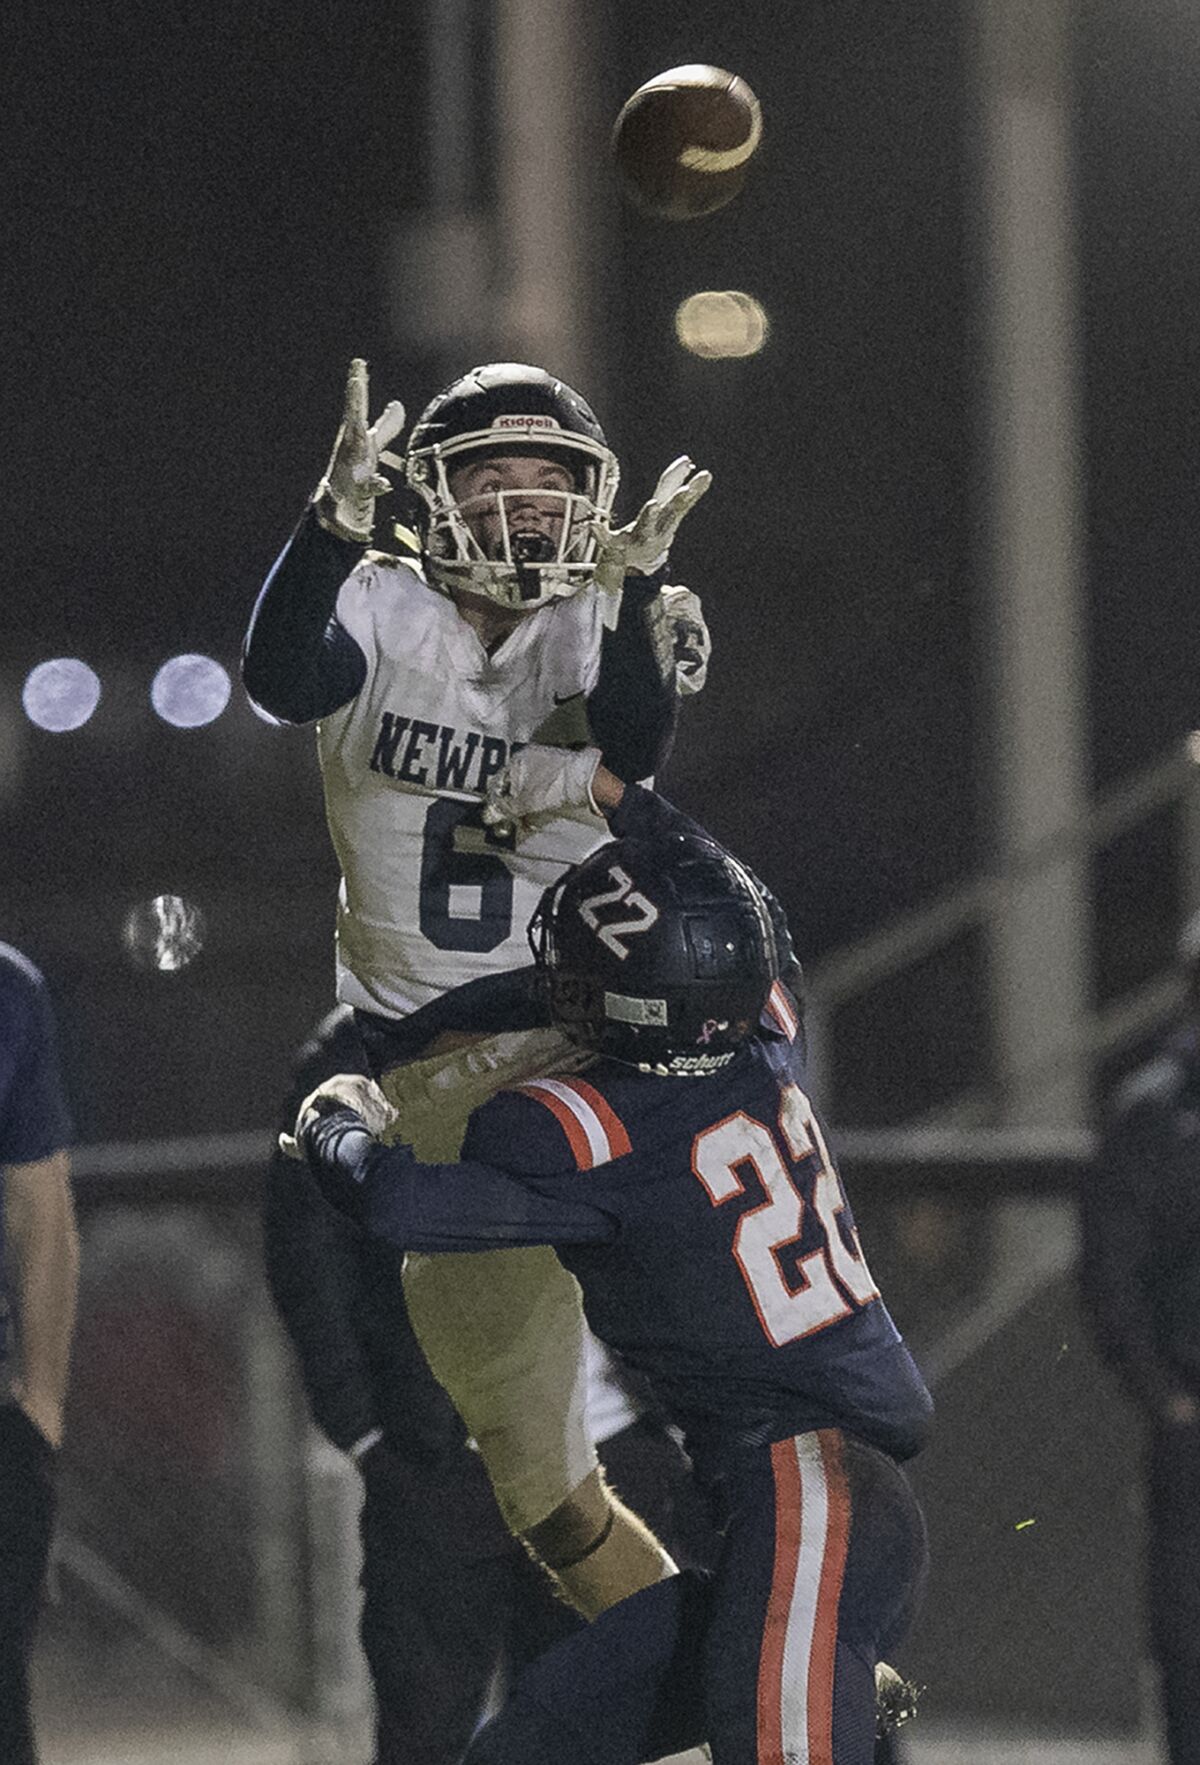 Newport Harbor's Kashton Henjum makes a catch over Cypress' Jesse Mauldin for a two-point conversion on Friday.